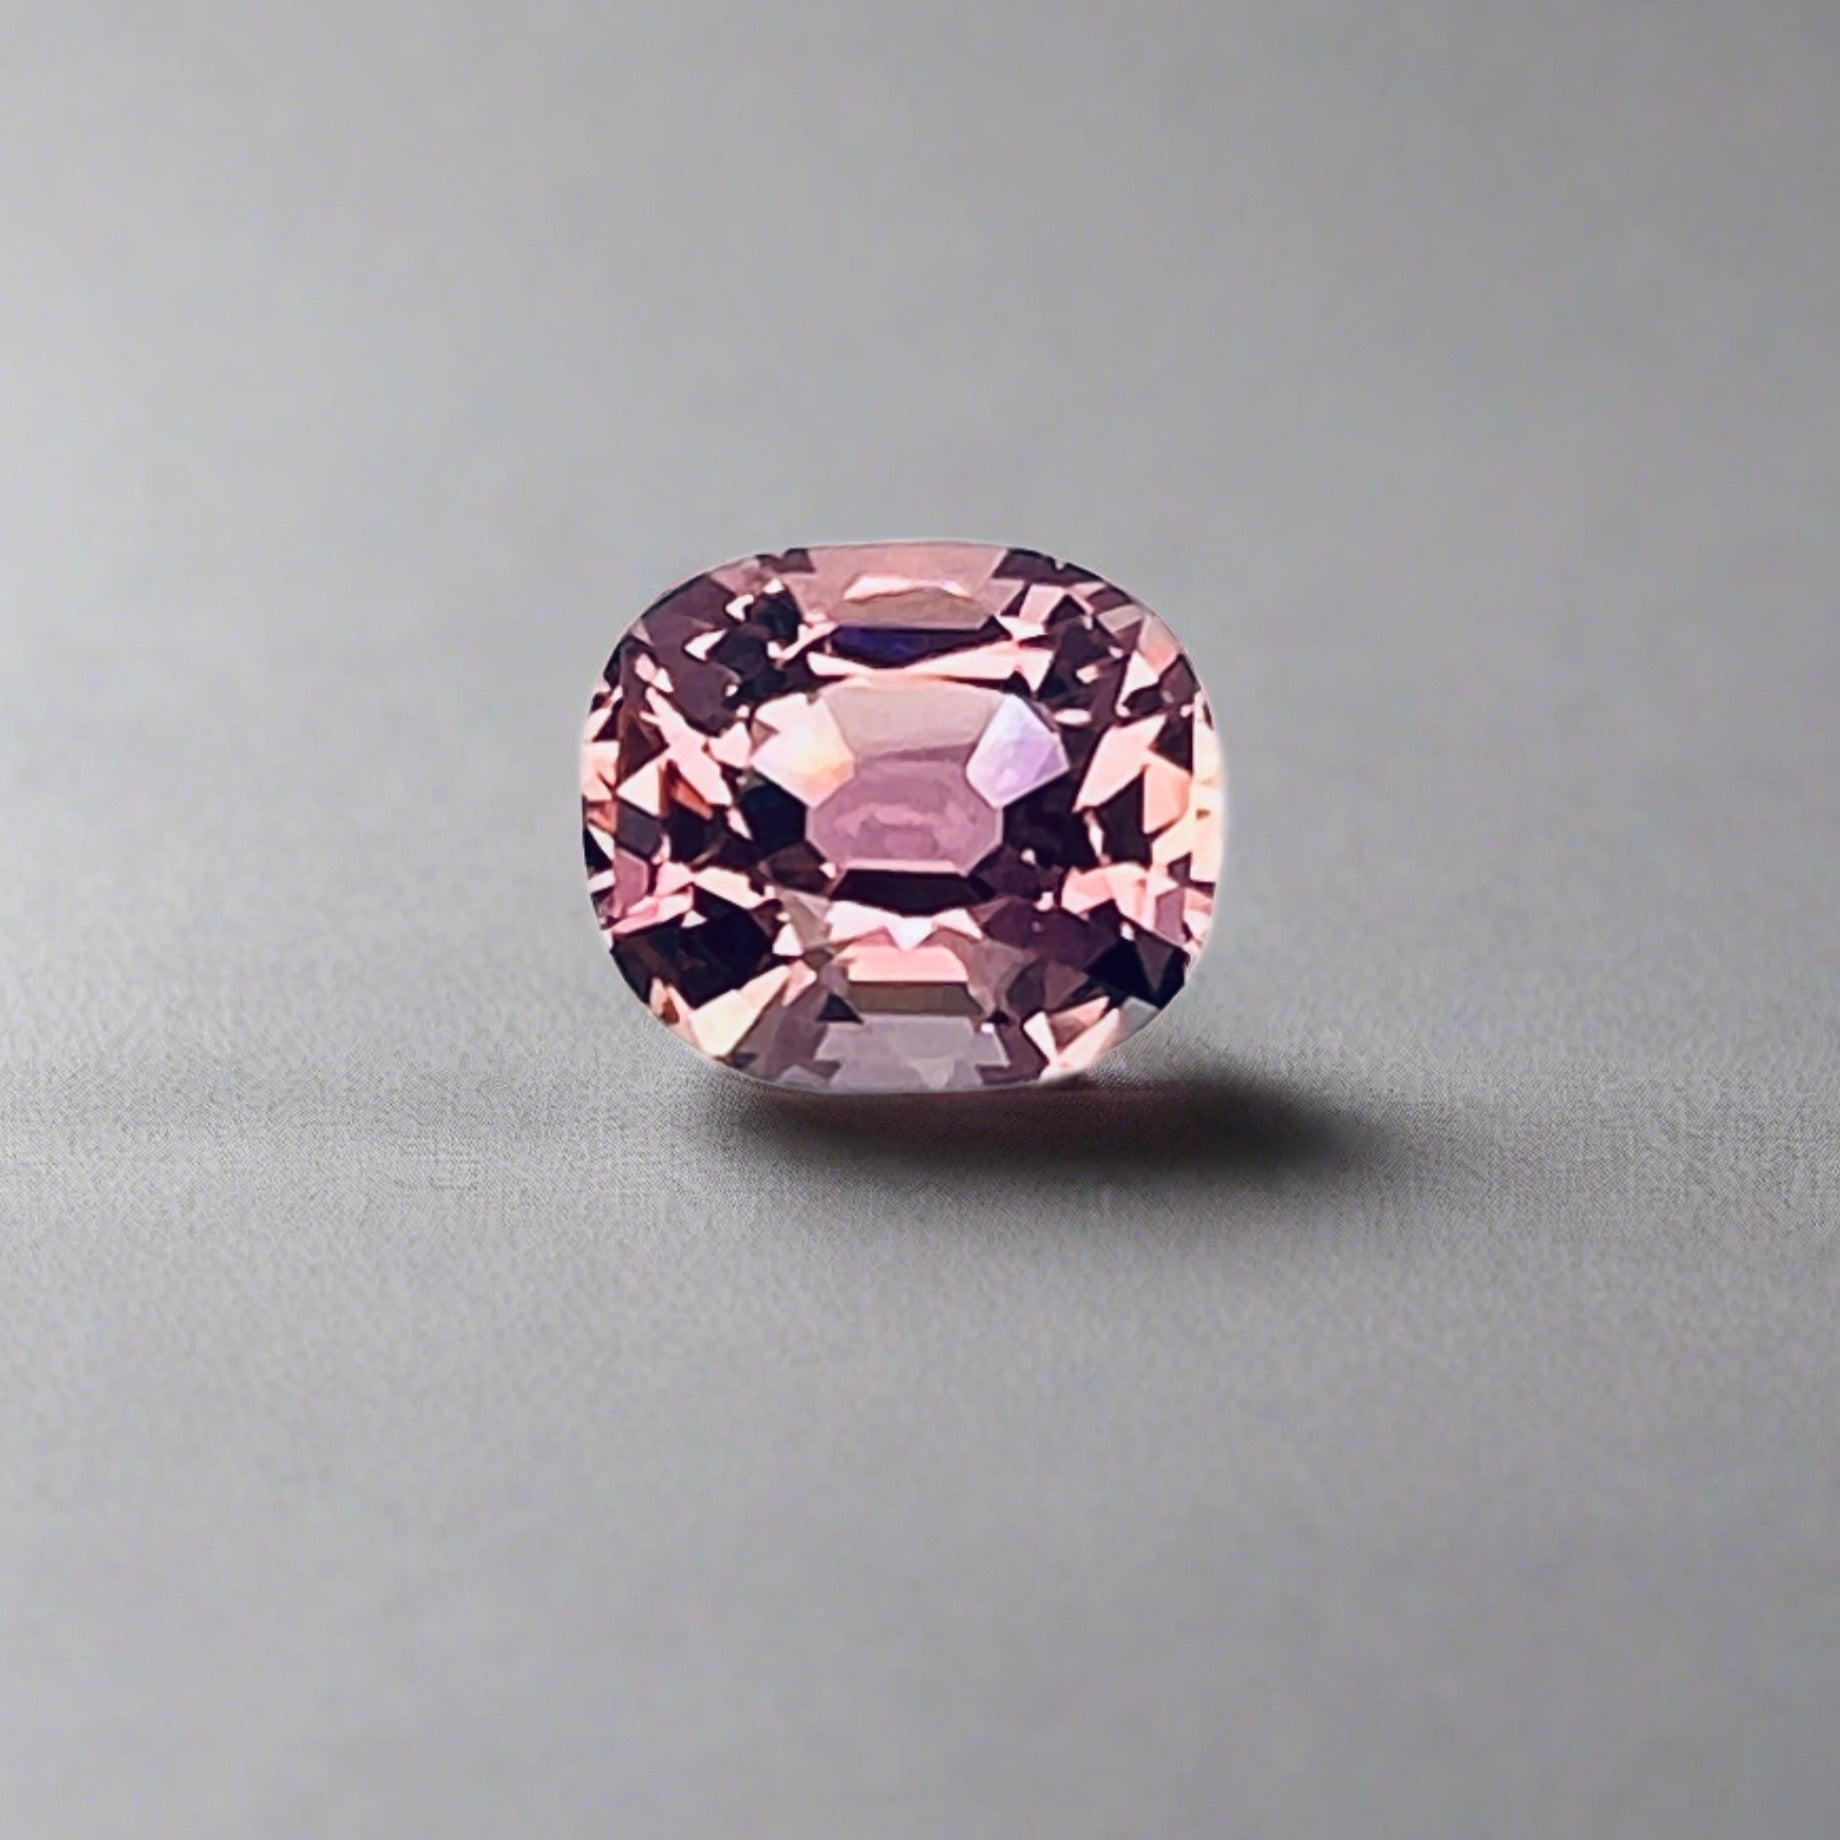 Pink tourmaline looking directly at the stone.